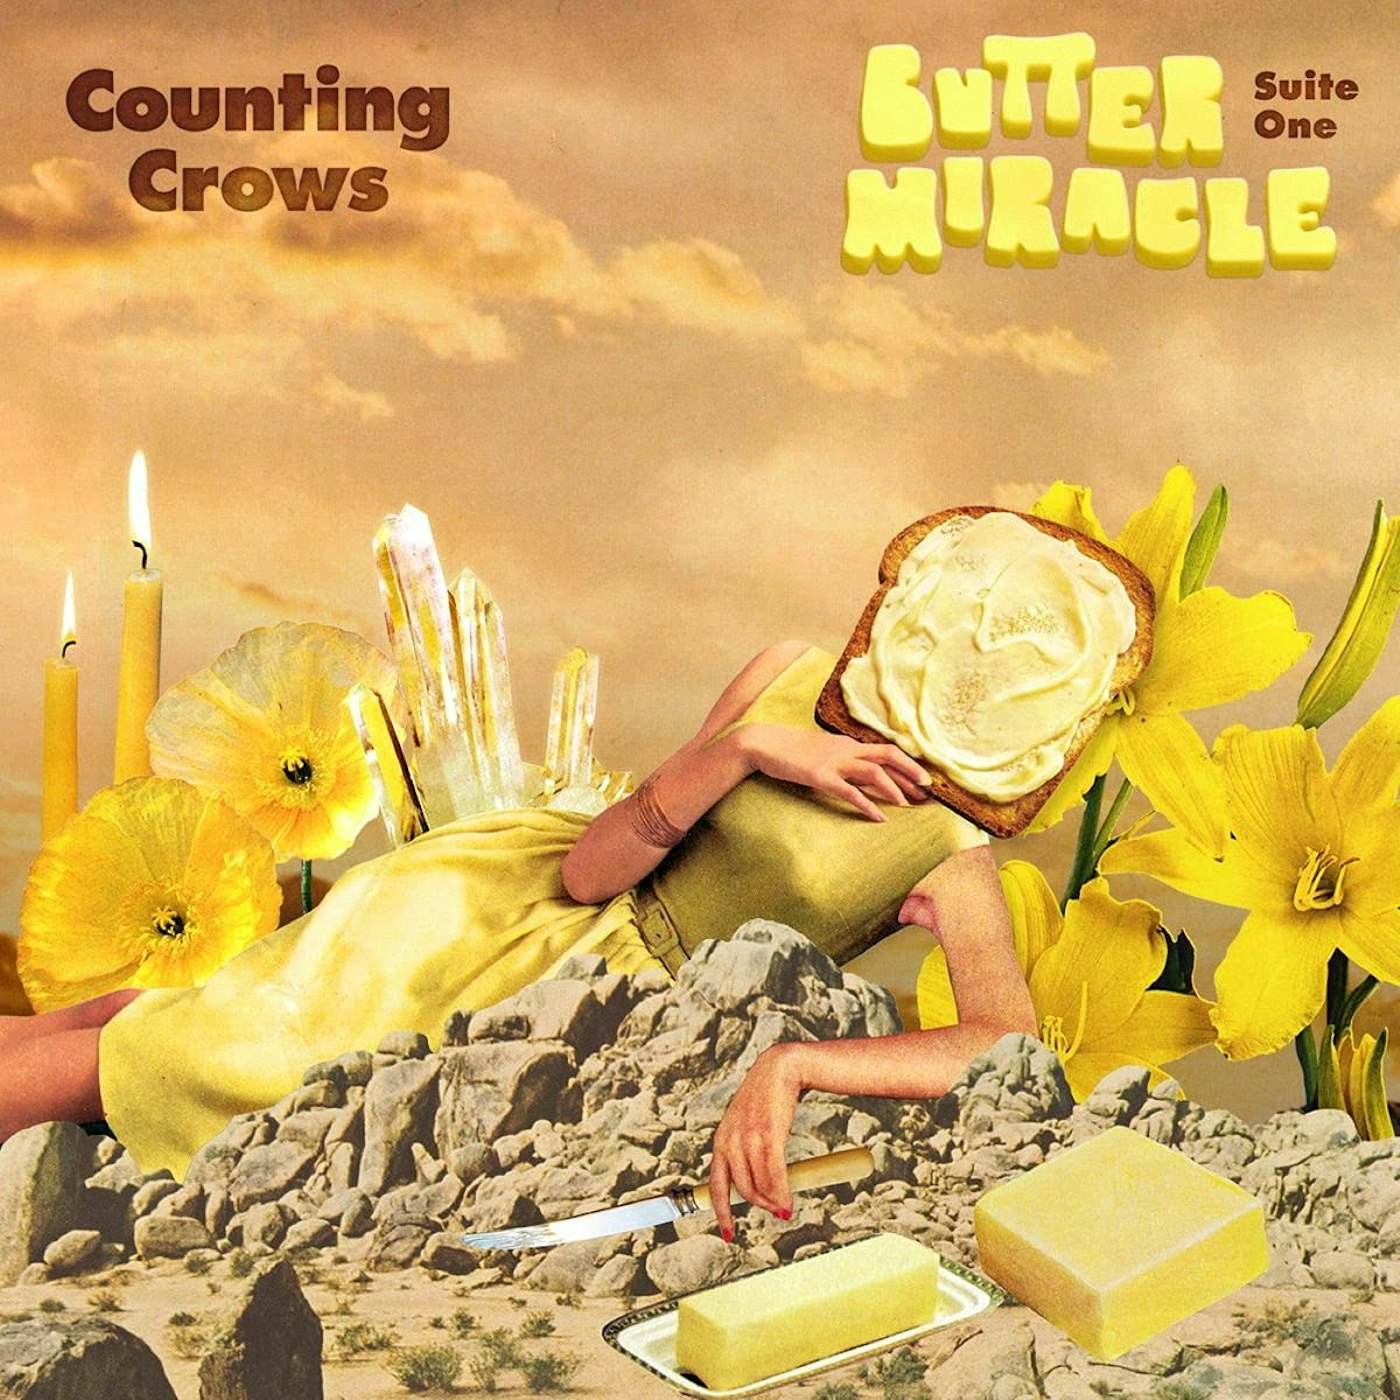 Counting Crows Butter Miracle Suite One Vinyl Record